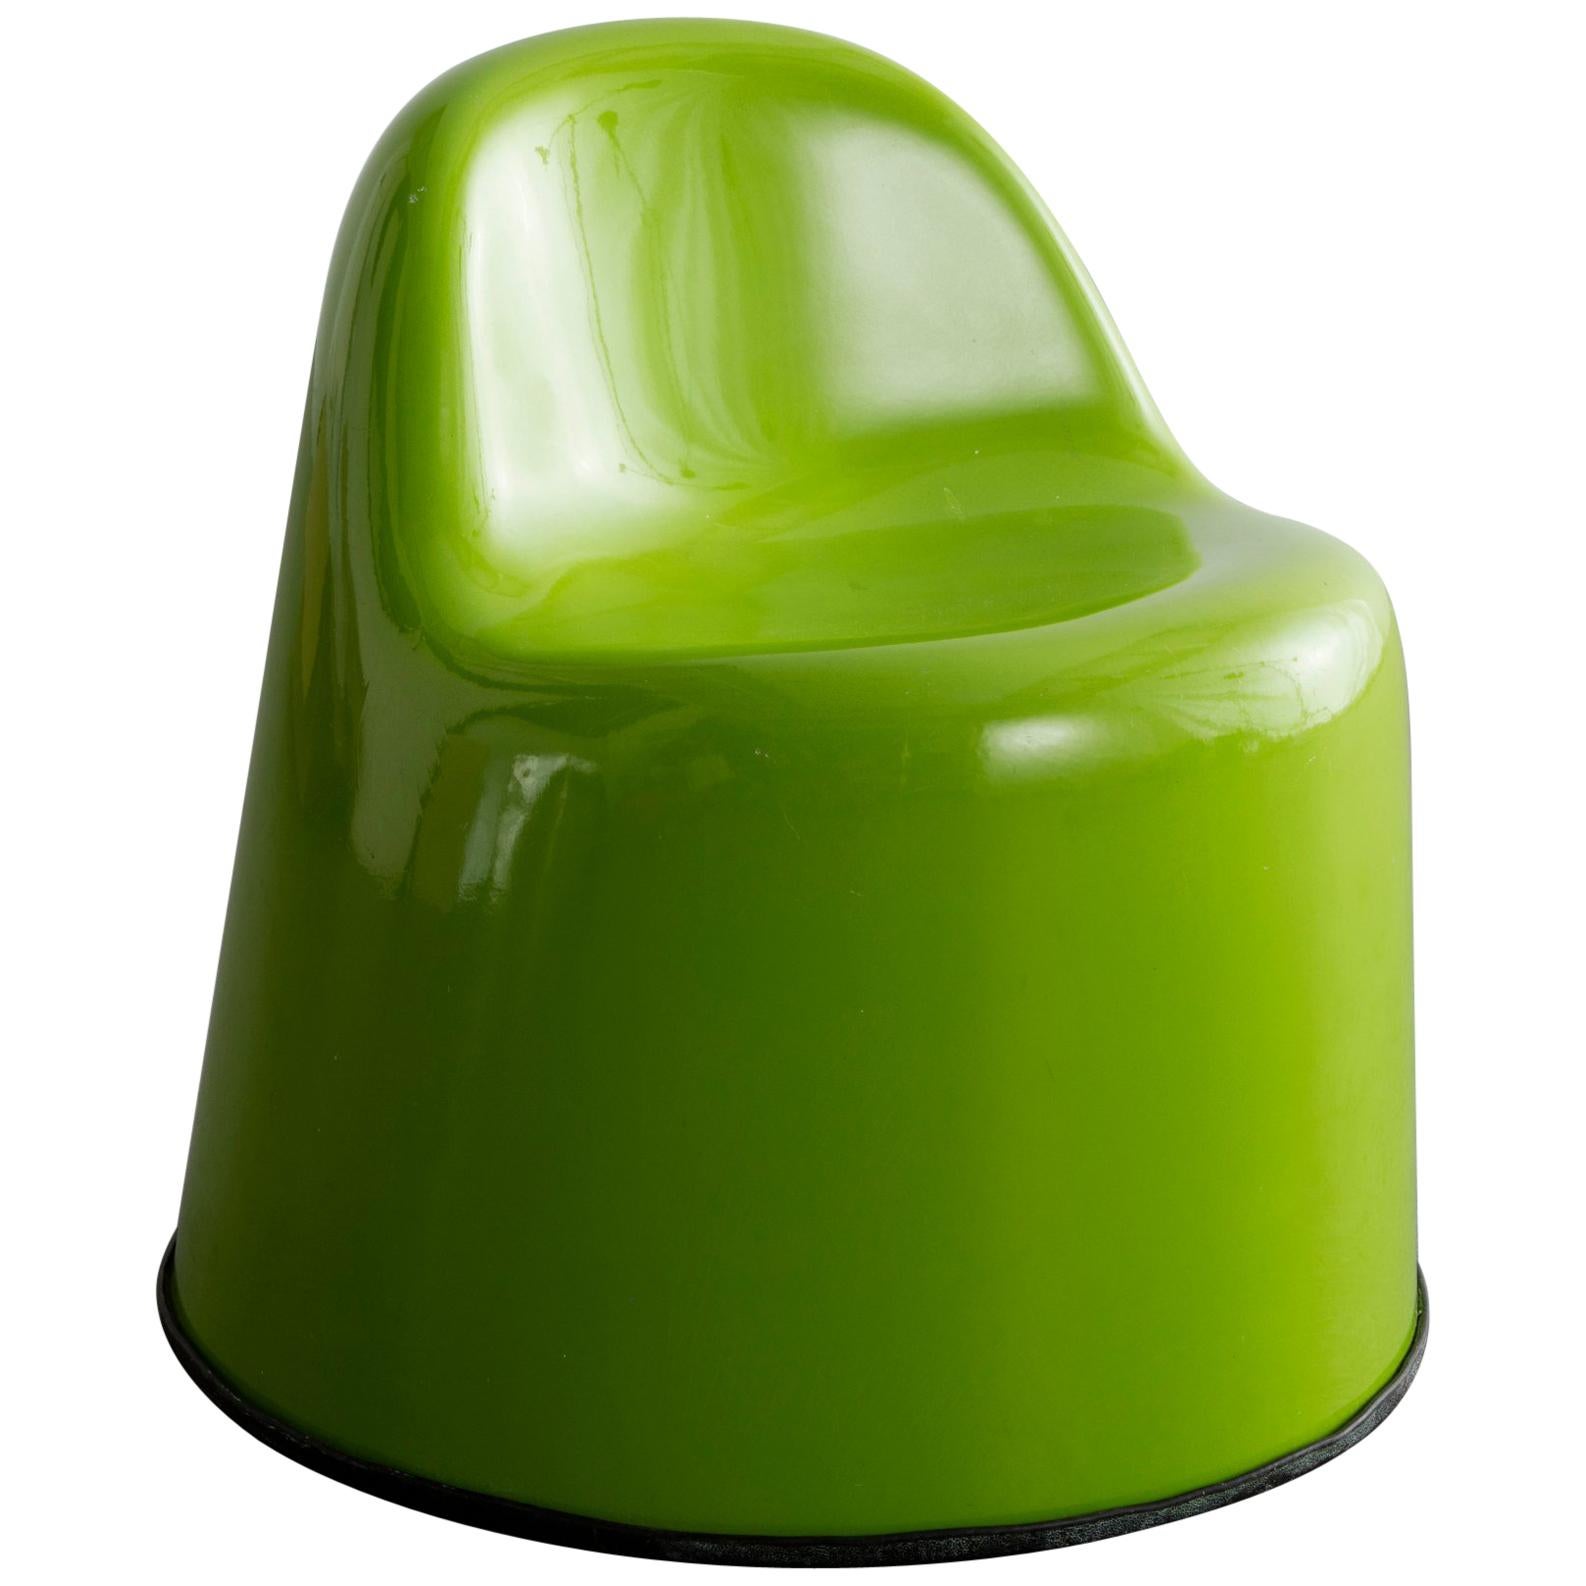 Baby Molar Chair in Lime Green Plastic by Wendell Castle, 1971 For Sale